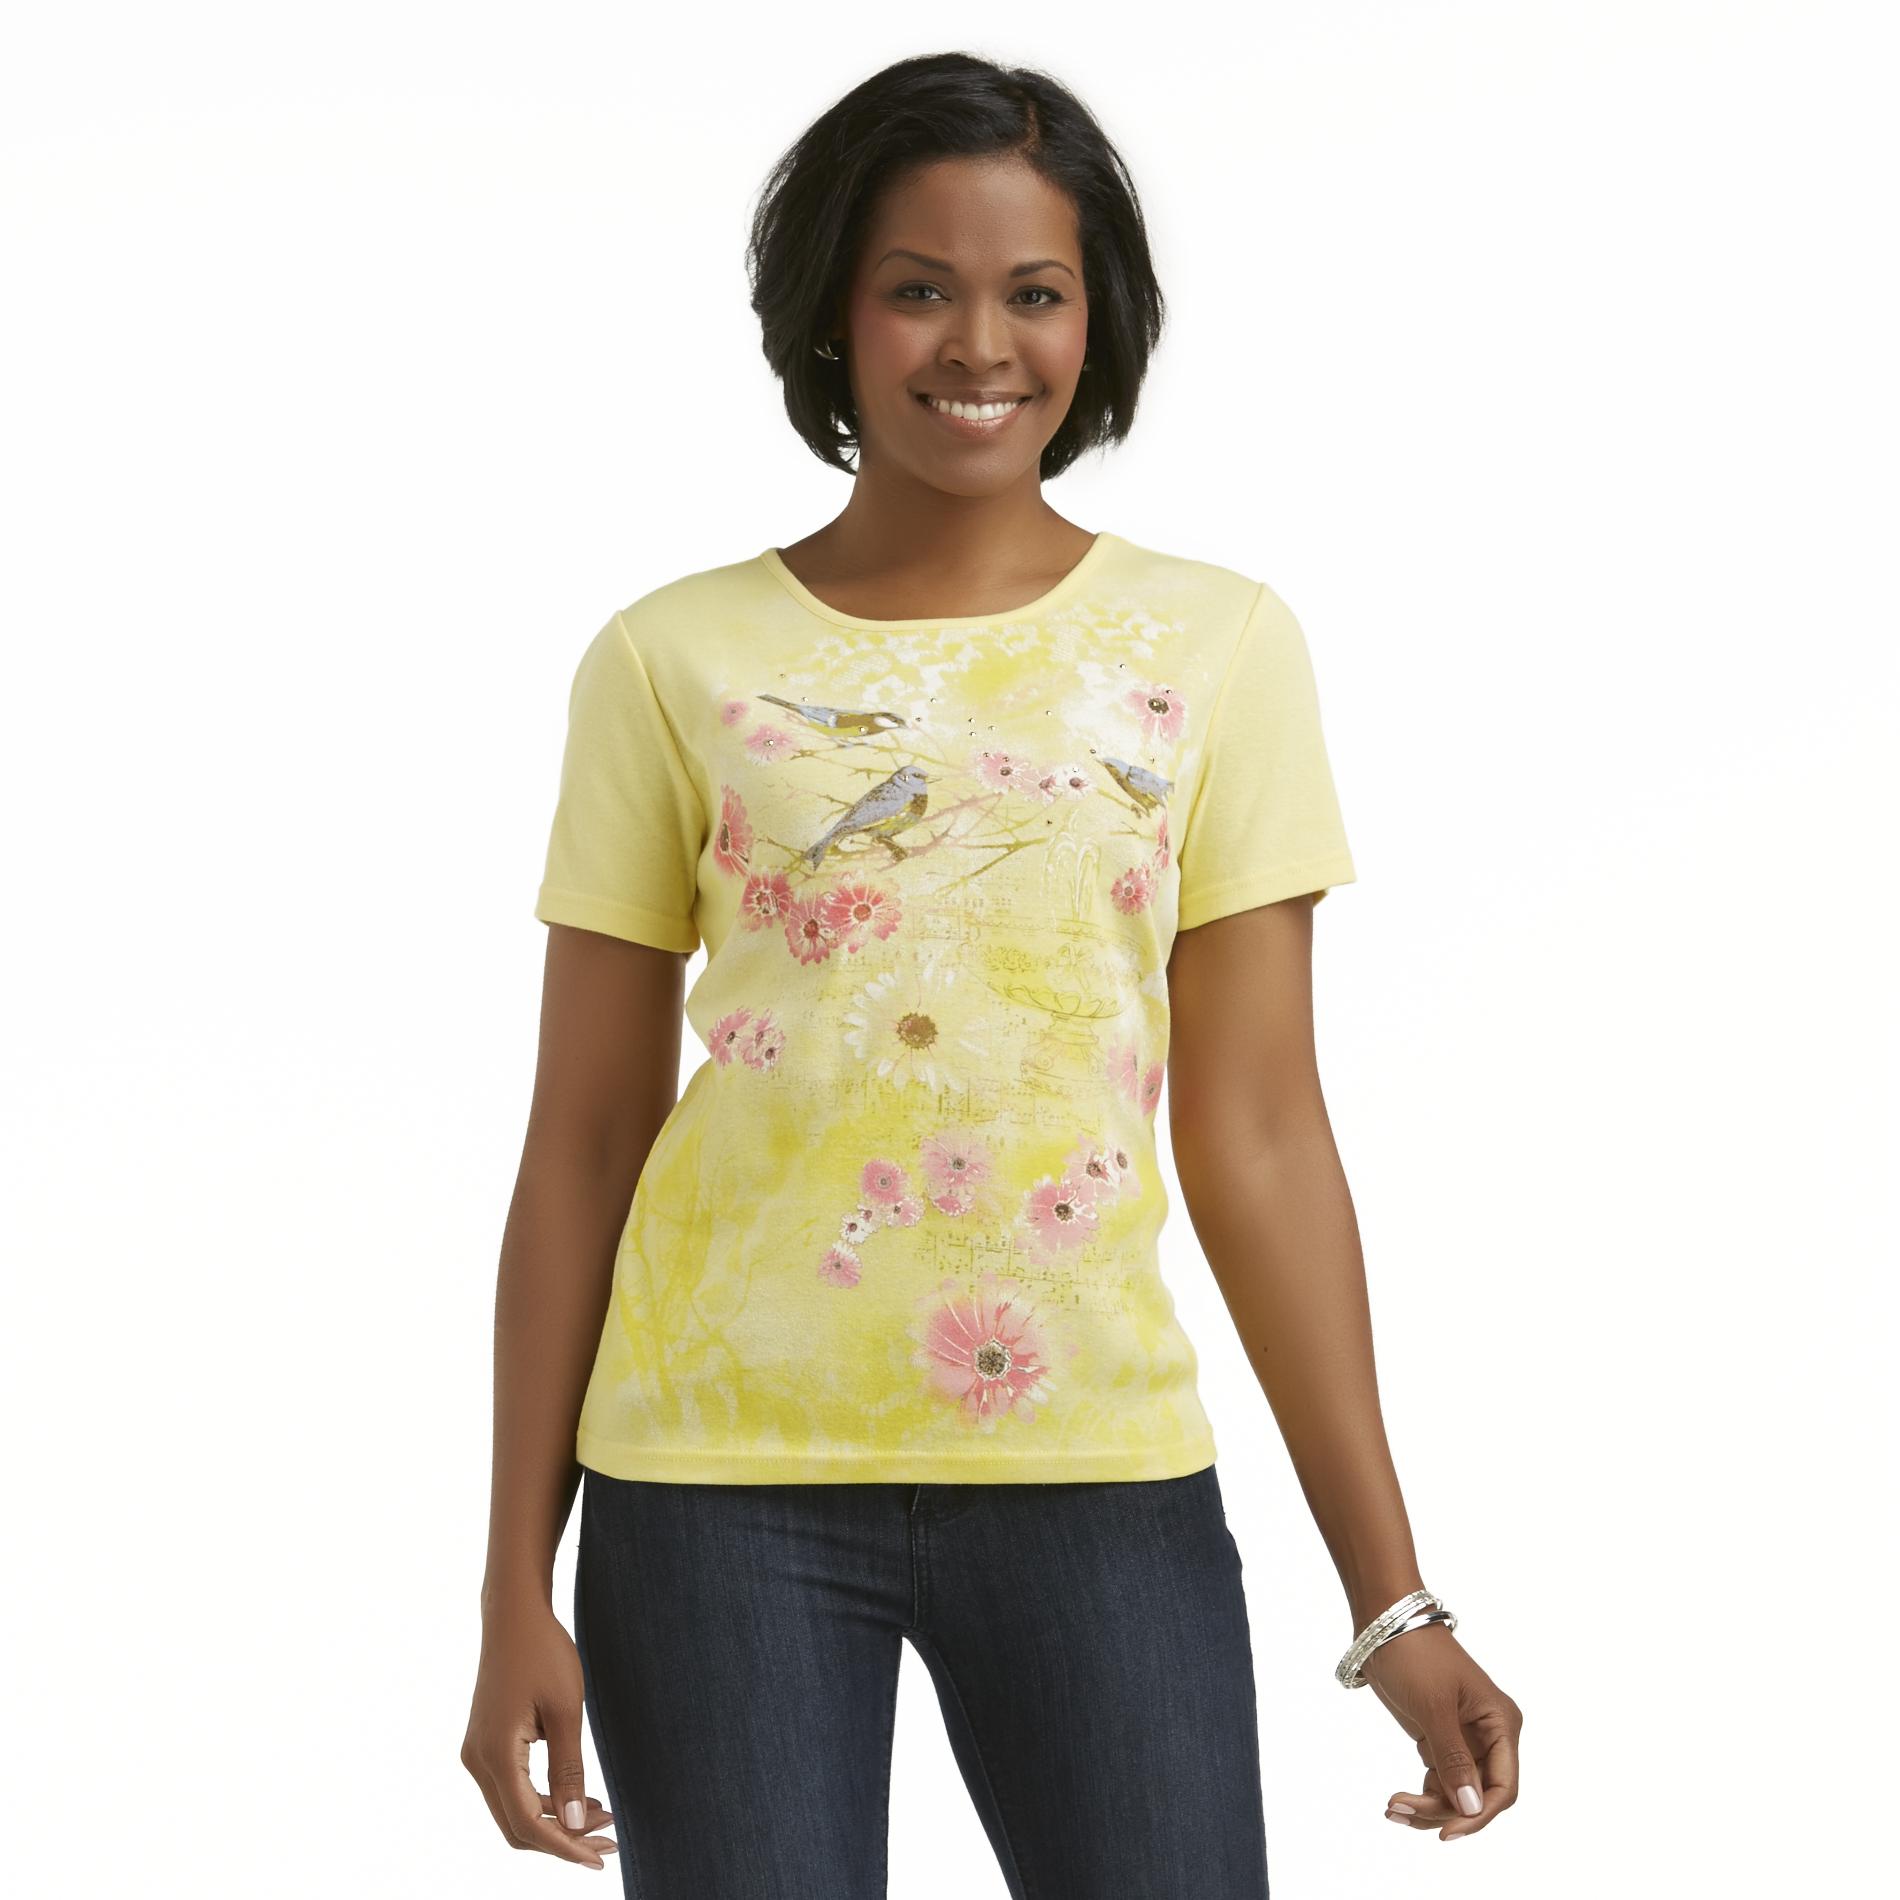 Basic Editions Women's Studded Graphic T-Shirt - Birds & Flowers